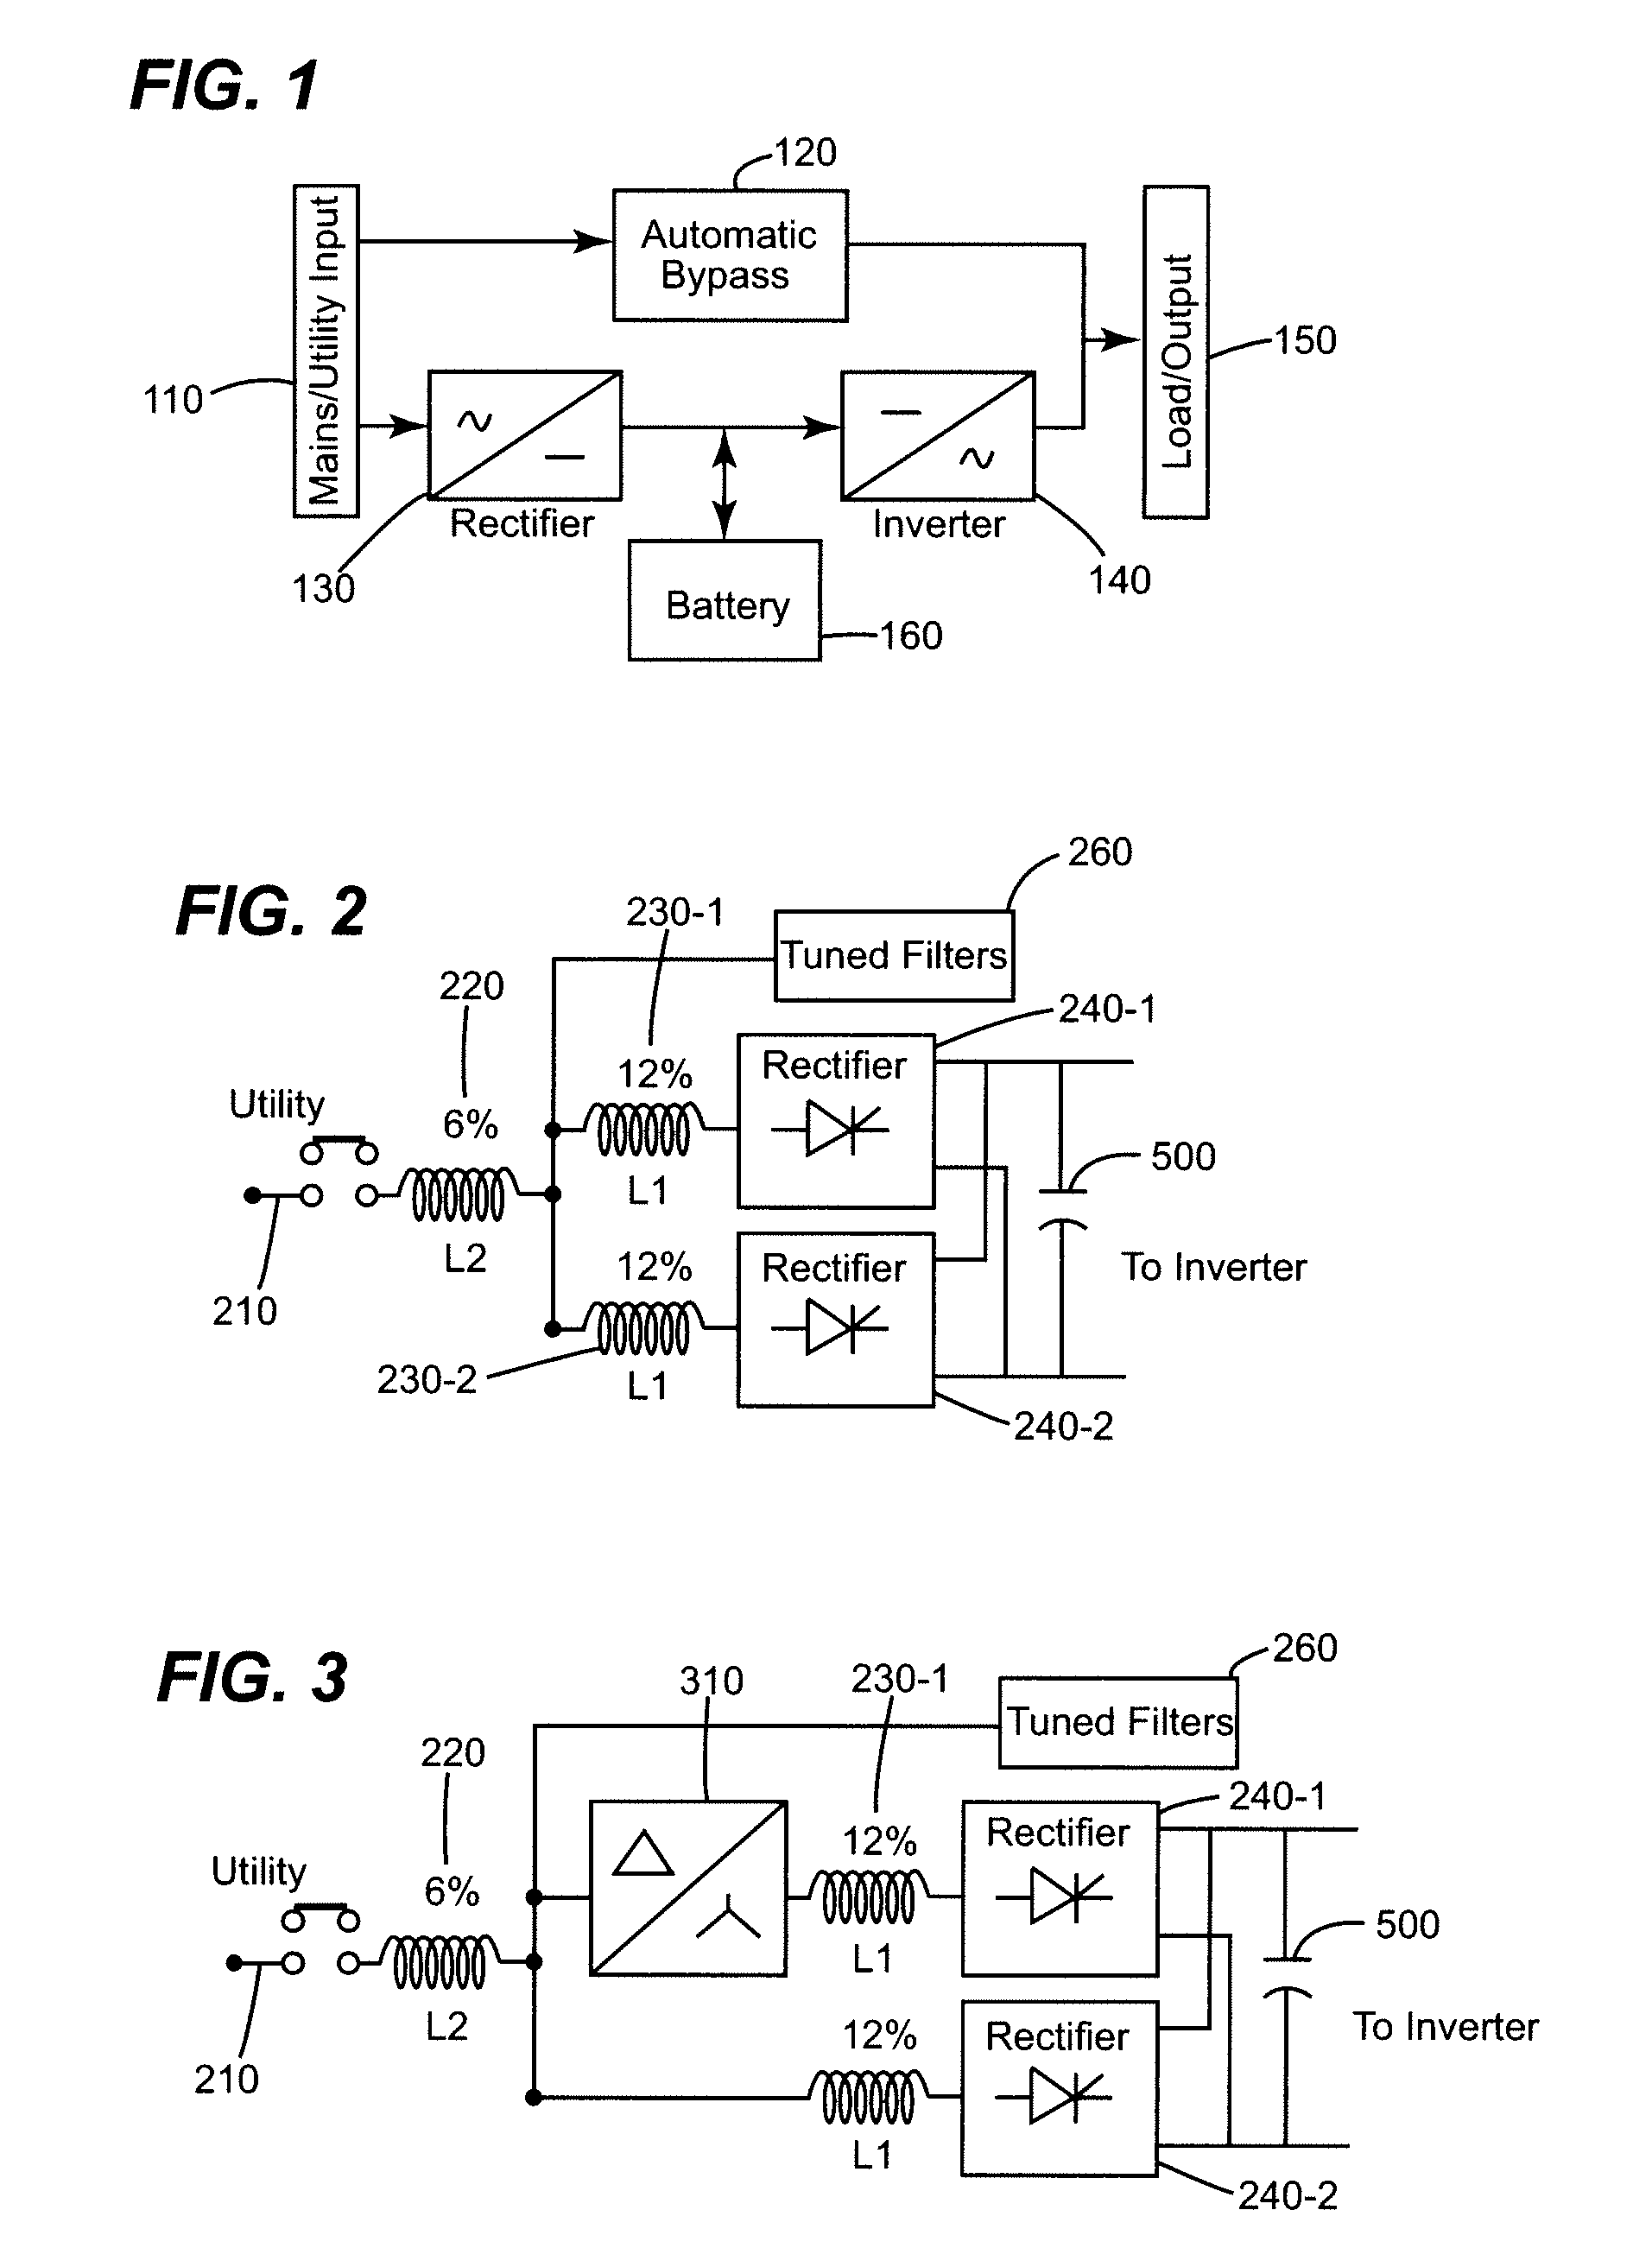 Method and system for managing uninterruptable power supply for harmonic reduction